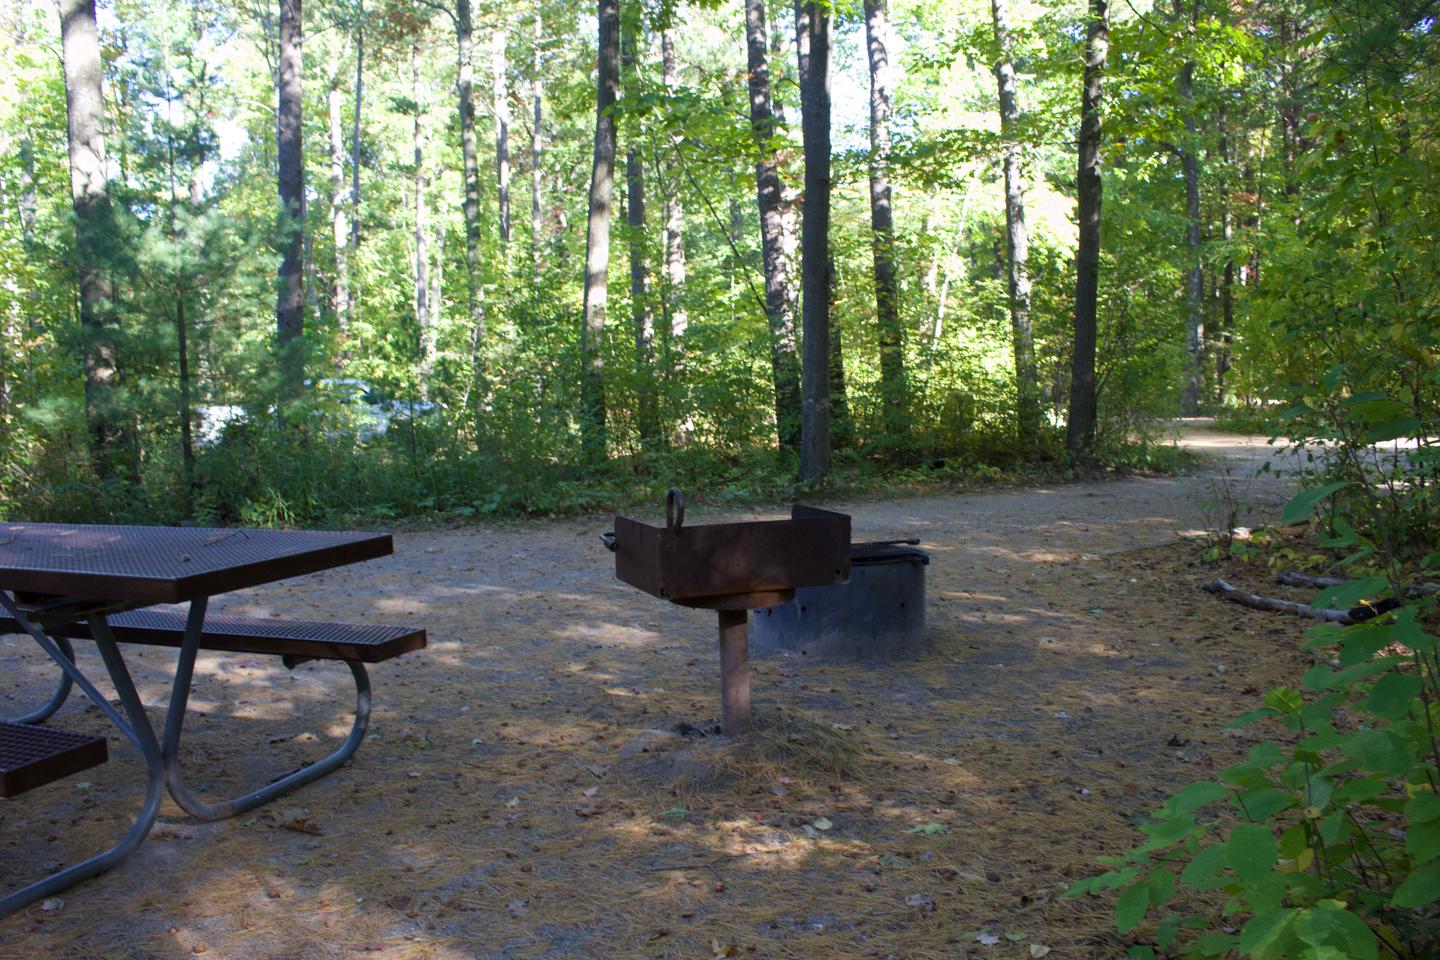 Campsite #85, view from the site toward the road